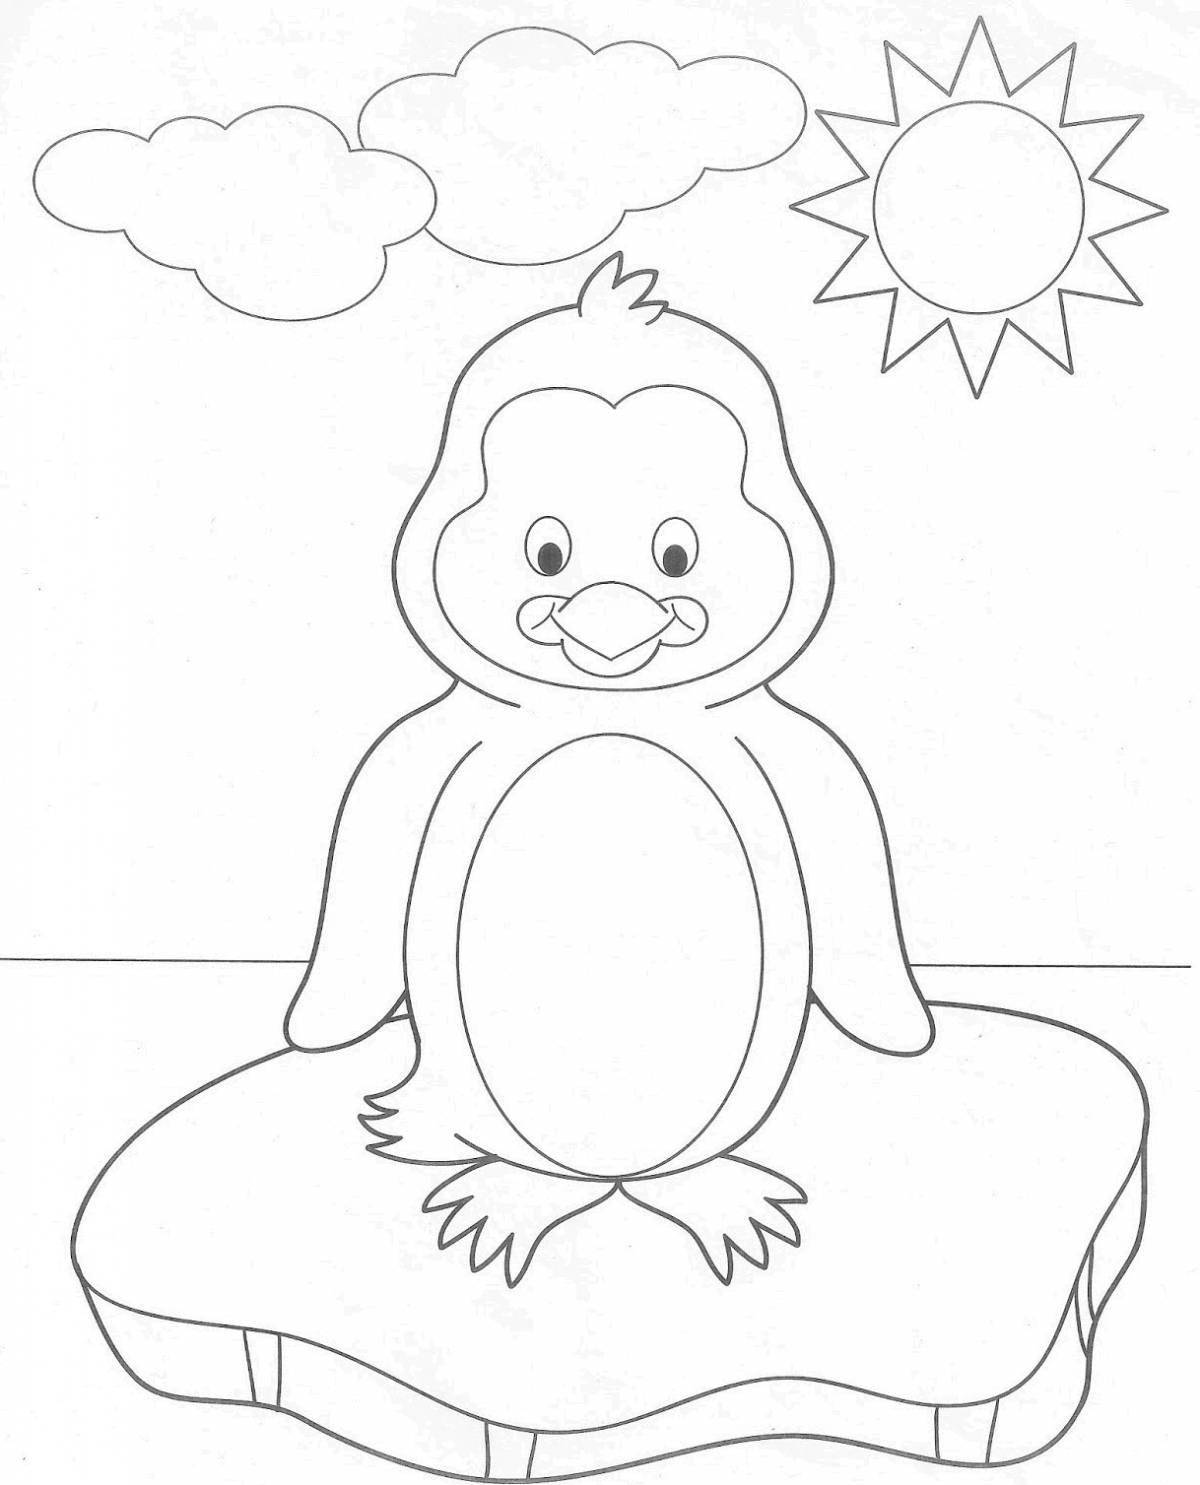 Exciting penguin coloring book template